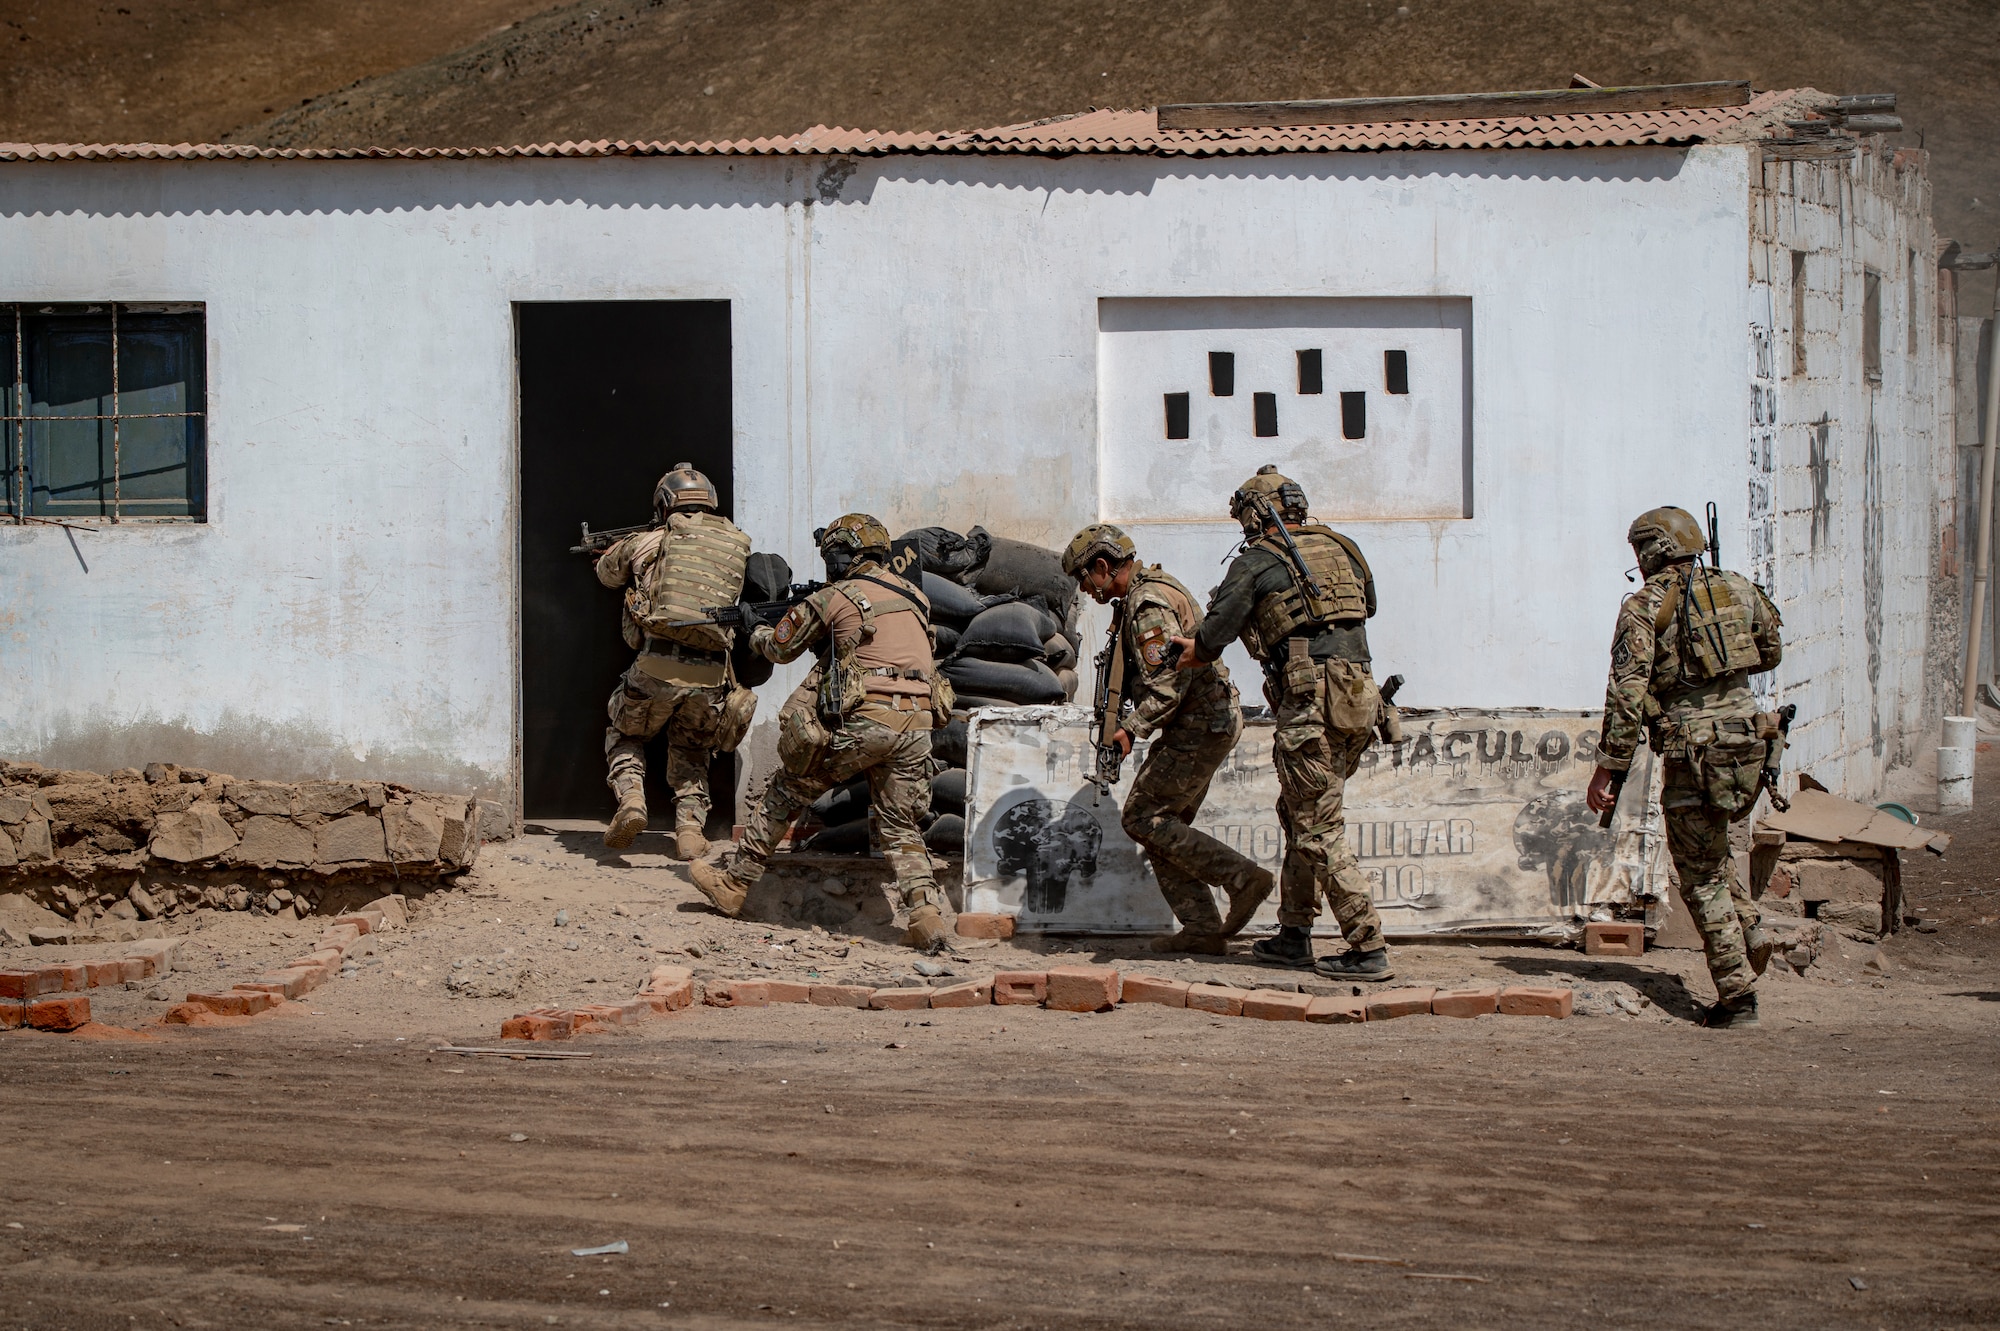 U.S. Air Force operators assigned to the Kentucky Air National Guard’s 123rd Special Tactics Squadron conduct a casualty evacuation training scenario with the U.S. Army’s 7th Special Forces Group, Peru’s Defensa y Operaciones Especiales and other Special Operations Forces assets during exercise Resolute Sentinel 23 in Peru, July 20, 2023. Resolute Sentinel improves readiness of U.S. and partner nation military and interagency personnel through joint defense interoperability training, engineering projects and knowledge exchanges. (U.S. Air Force photo by Master Sgt. Chris Hibben)